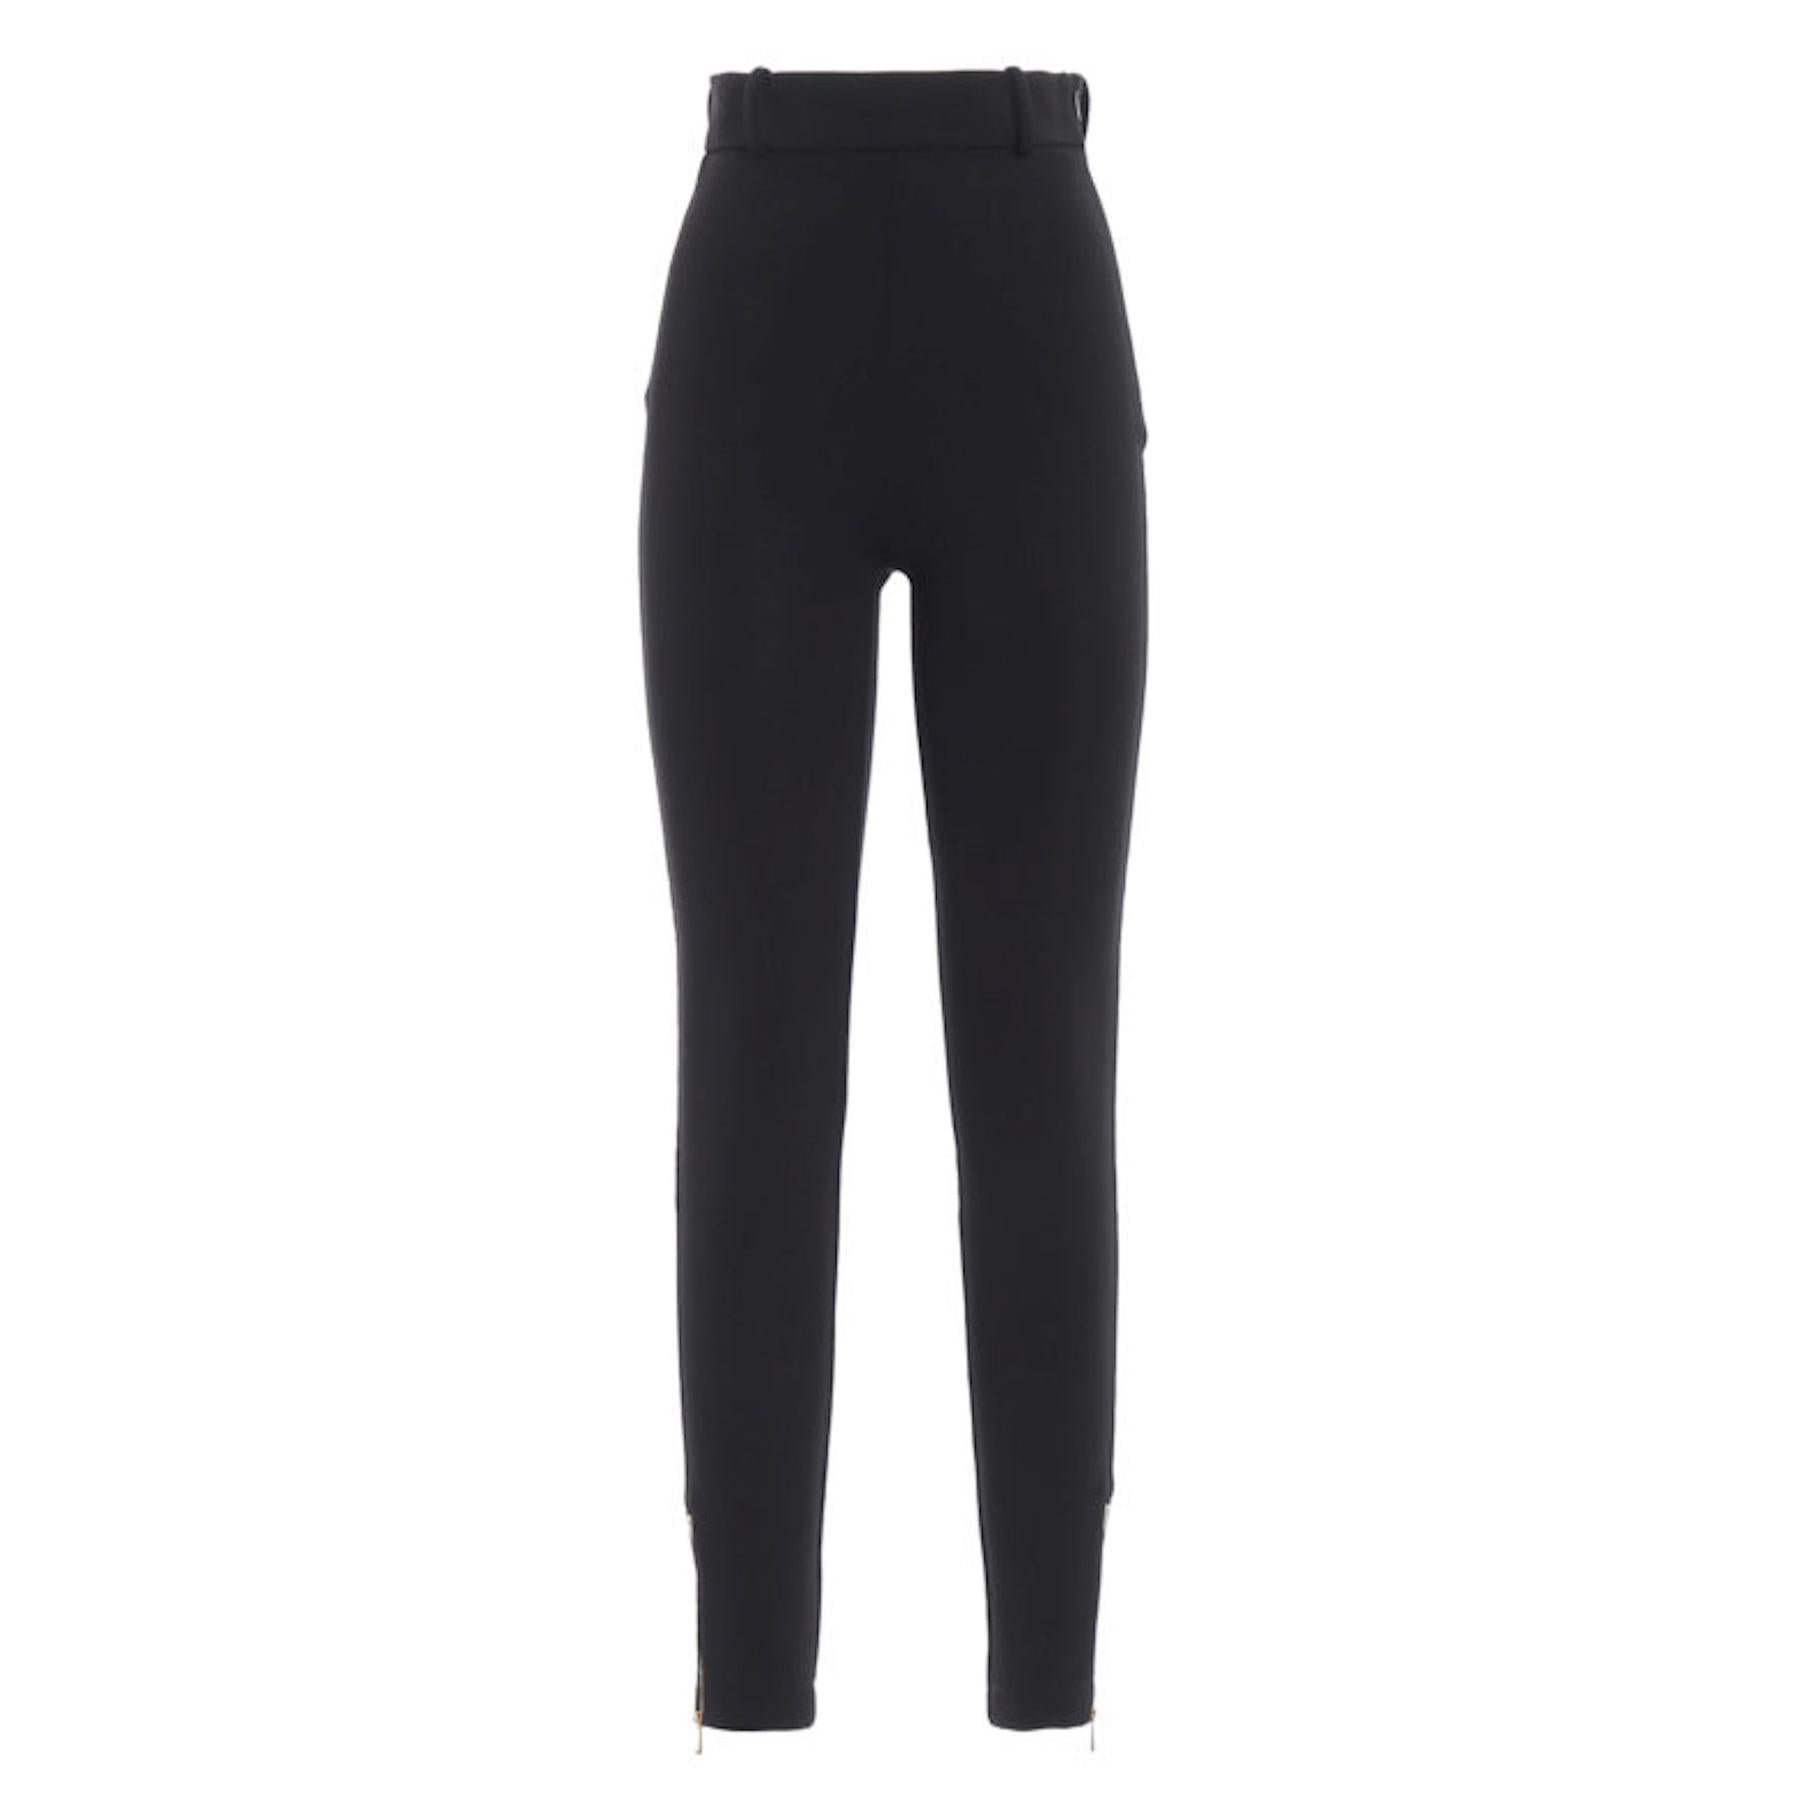 Versace Black Formal Knit Fitted Leggings / Pants Size 36